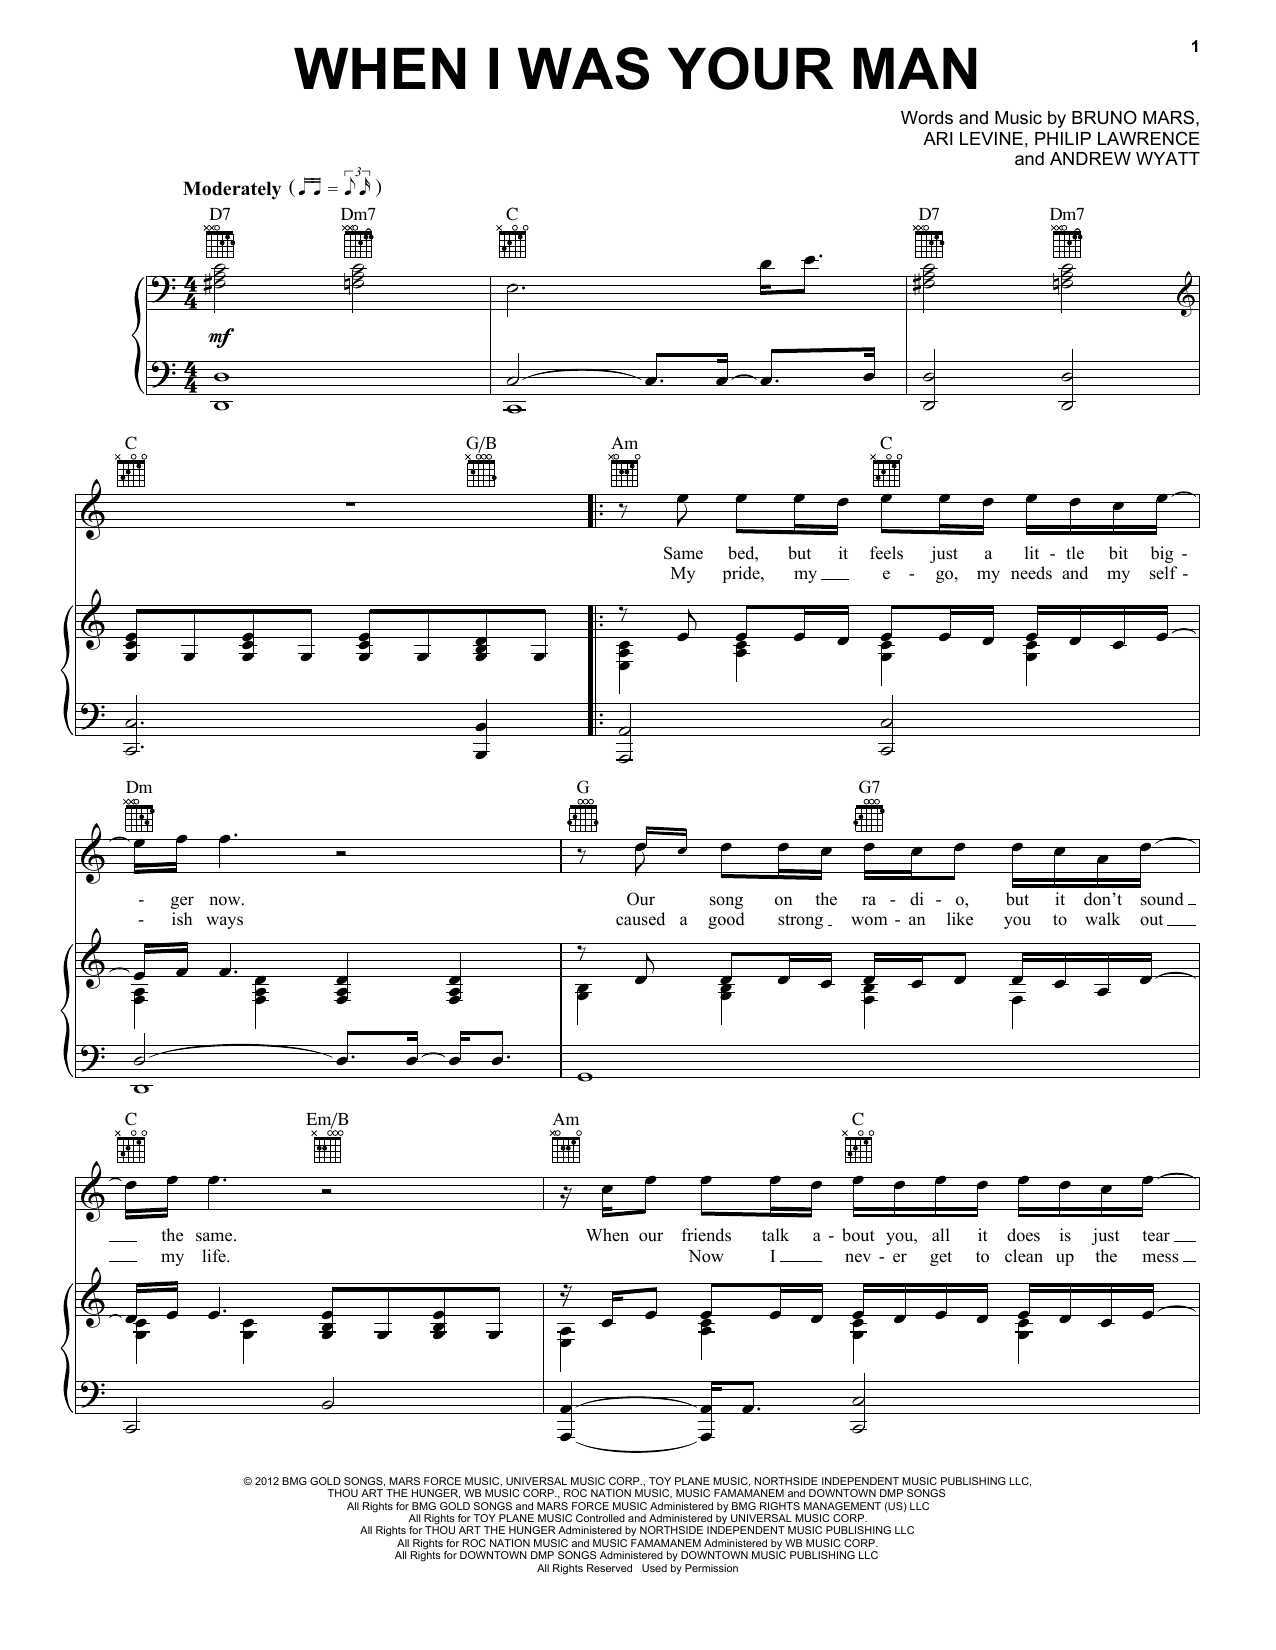 Bruno Mars When I Was Your Man Sheet Music Pdf Notes Chords Rock Score Piano Solo Download Printable Sku 150844